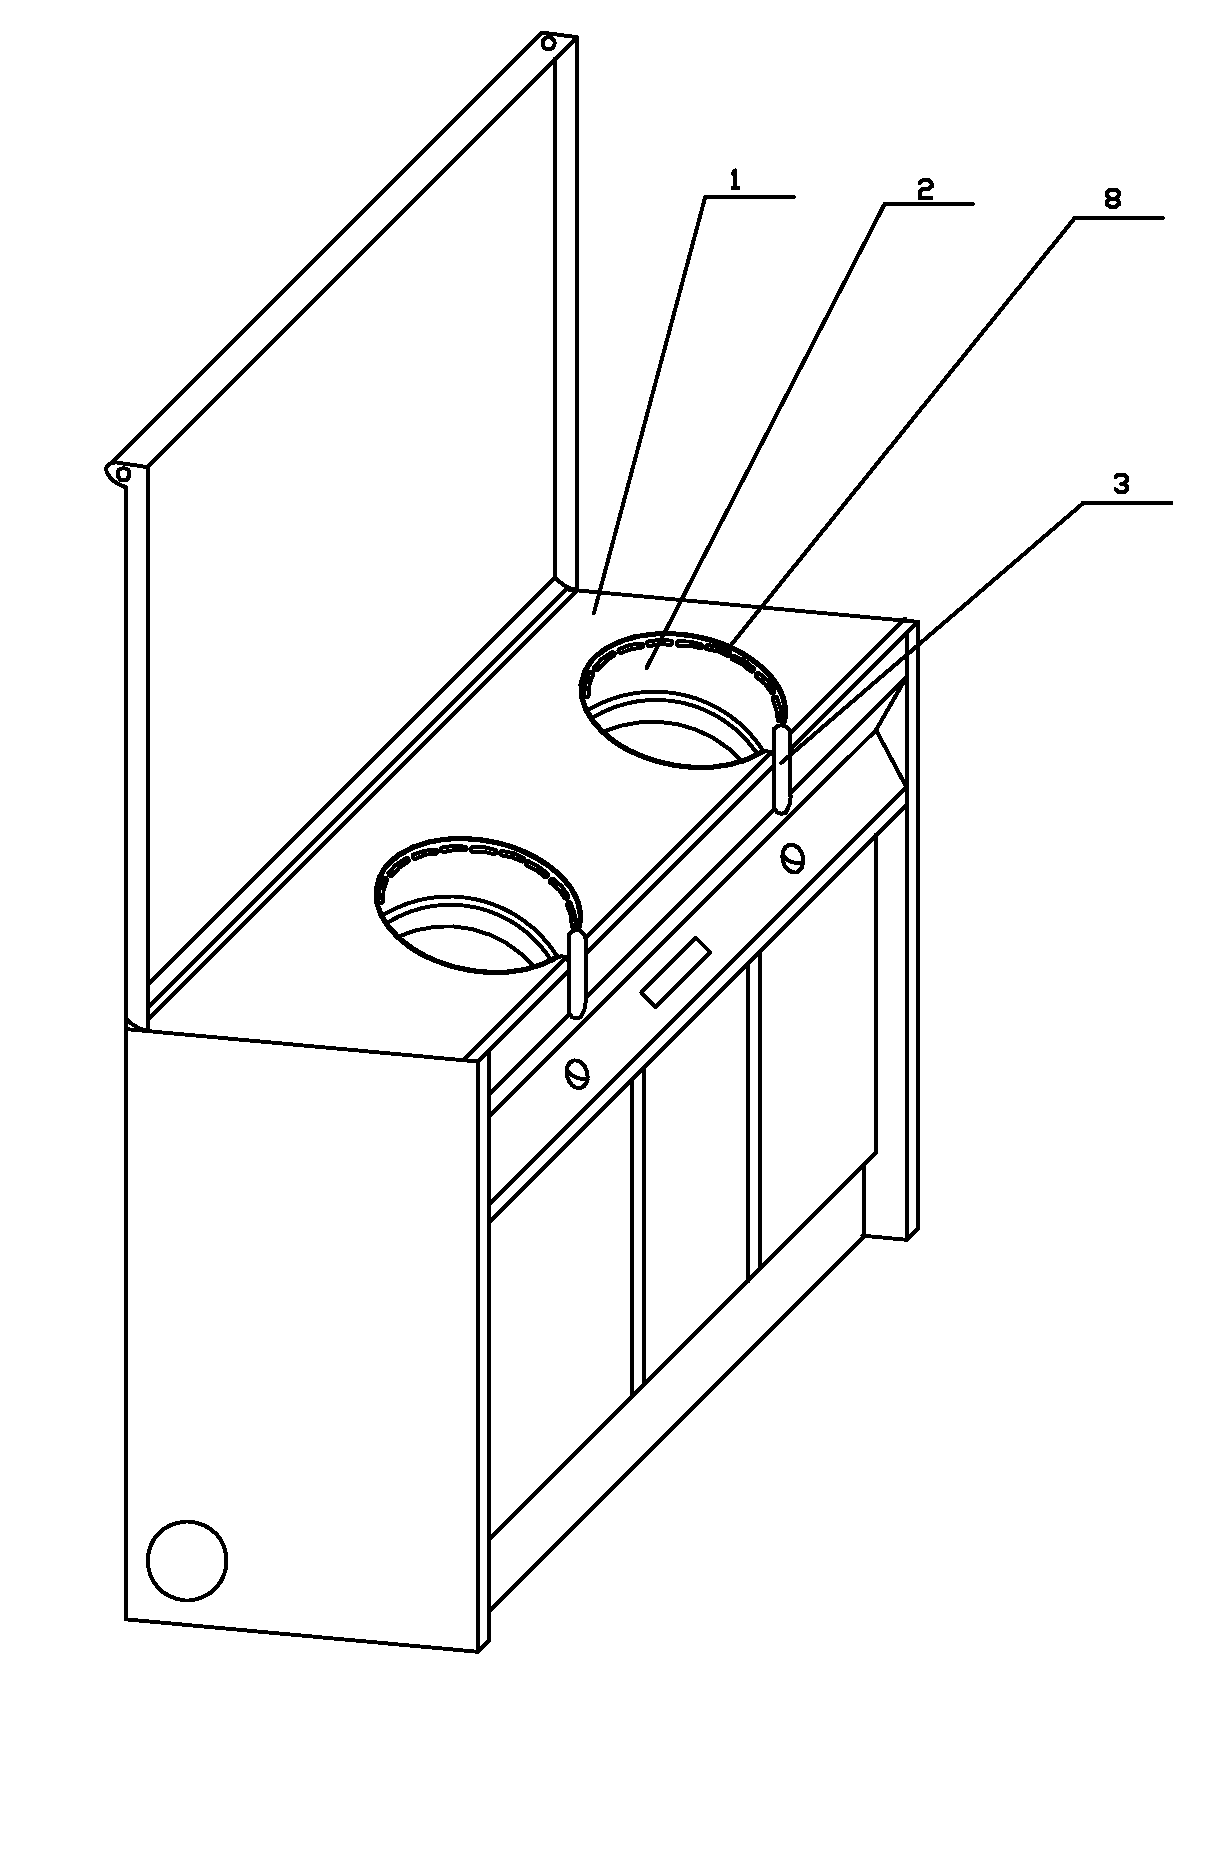 Integrated stove in which oil smoke is discharged downward